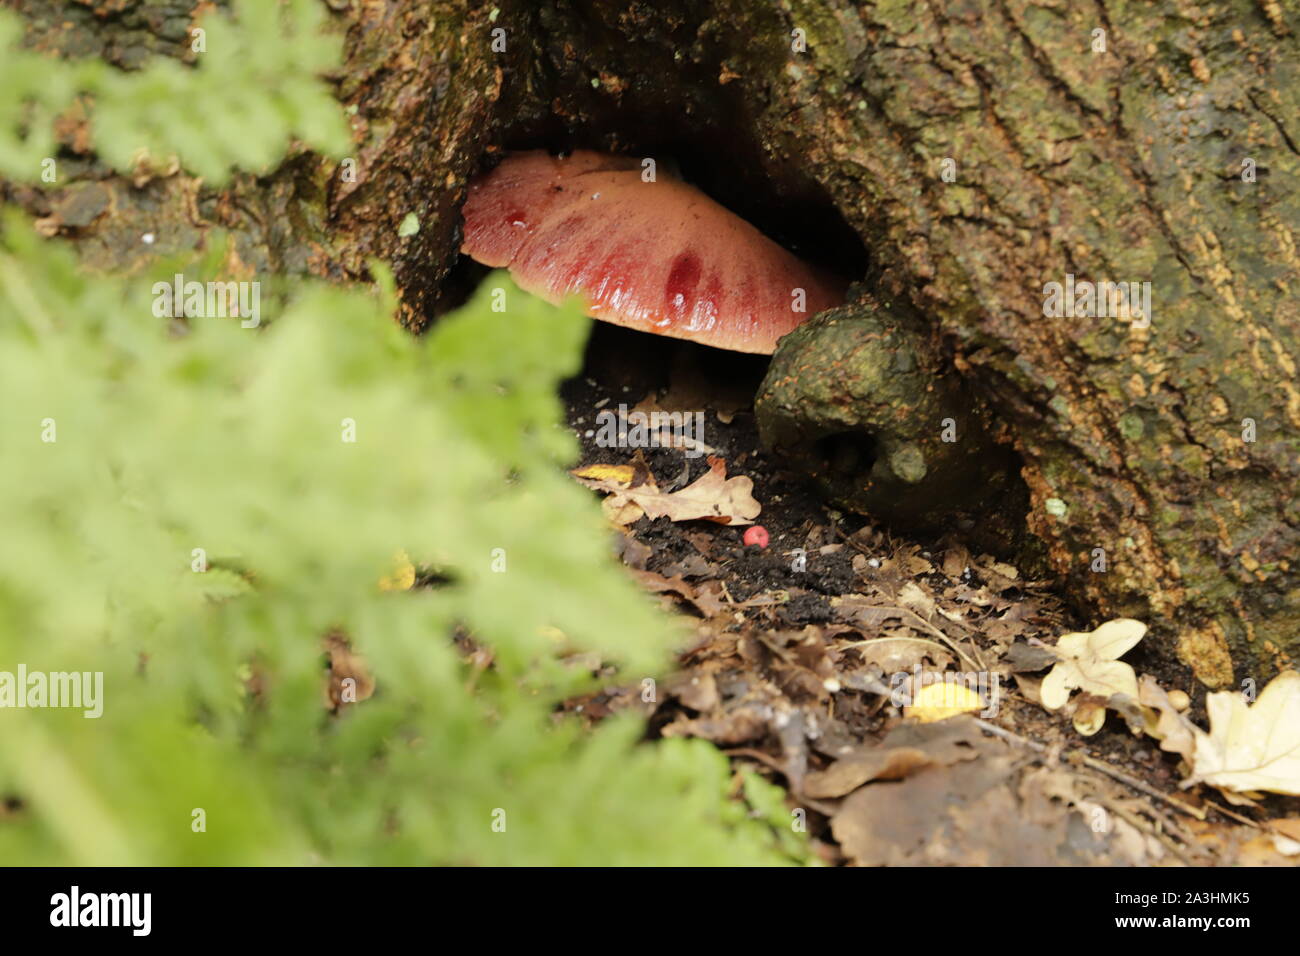 Beefsteak or Oxtongue is this fungus called. The latin name is Fistulina hepatica Stock Photo